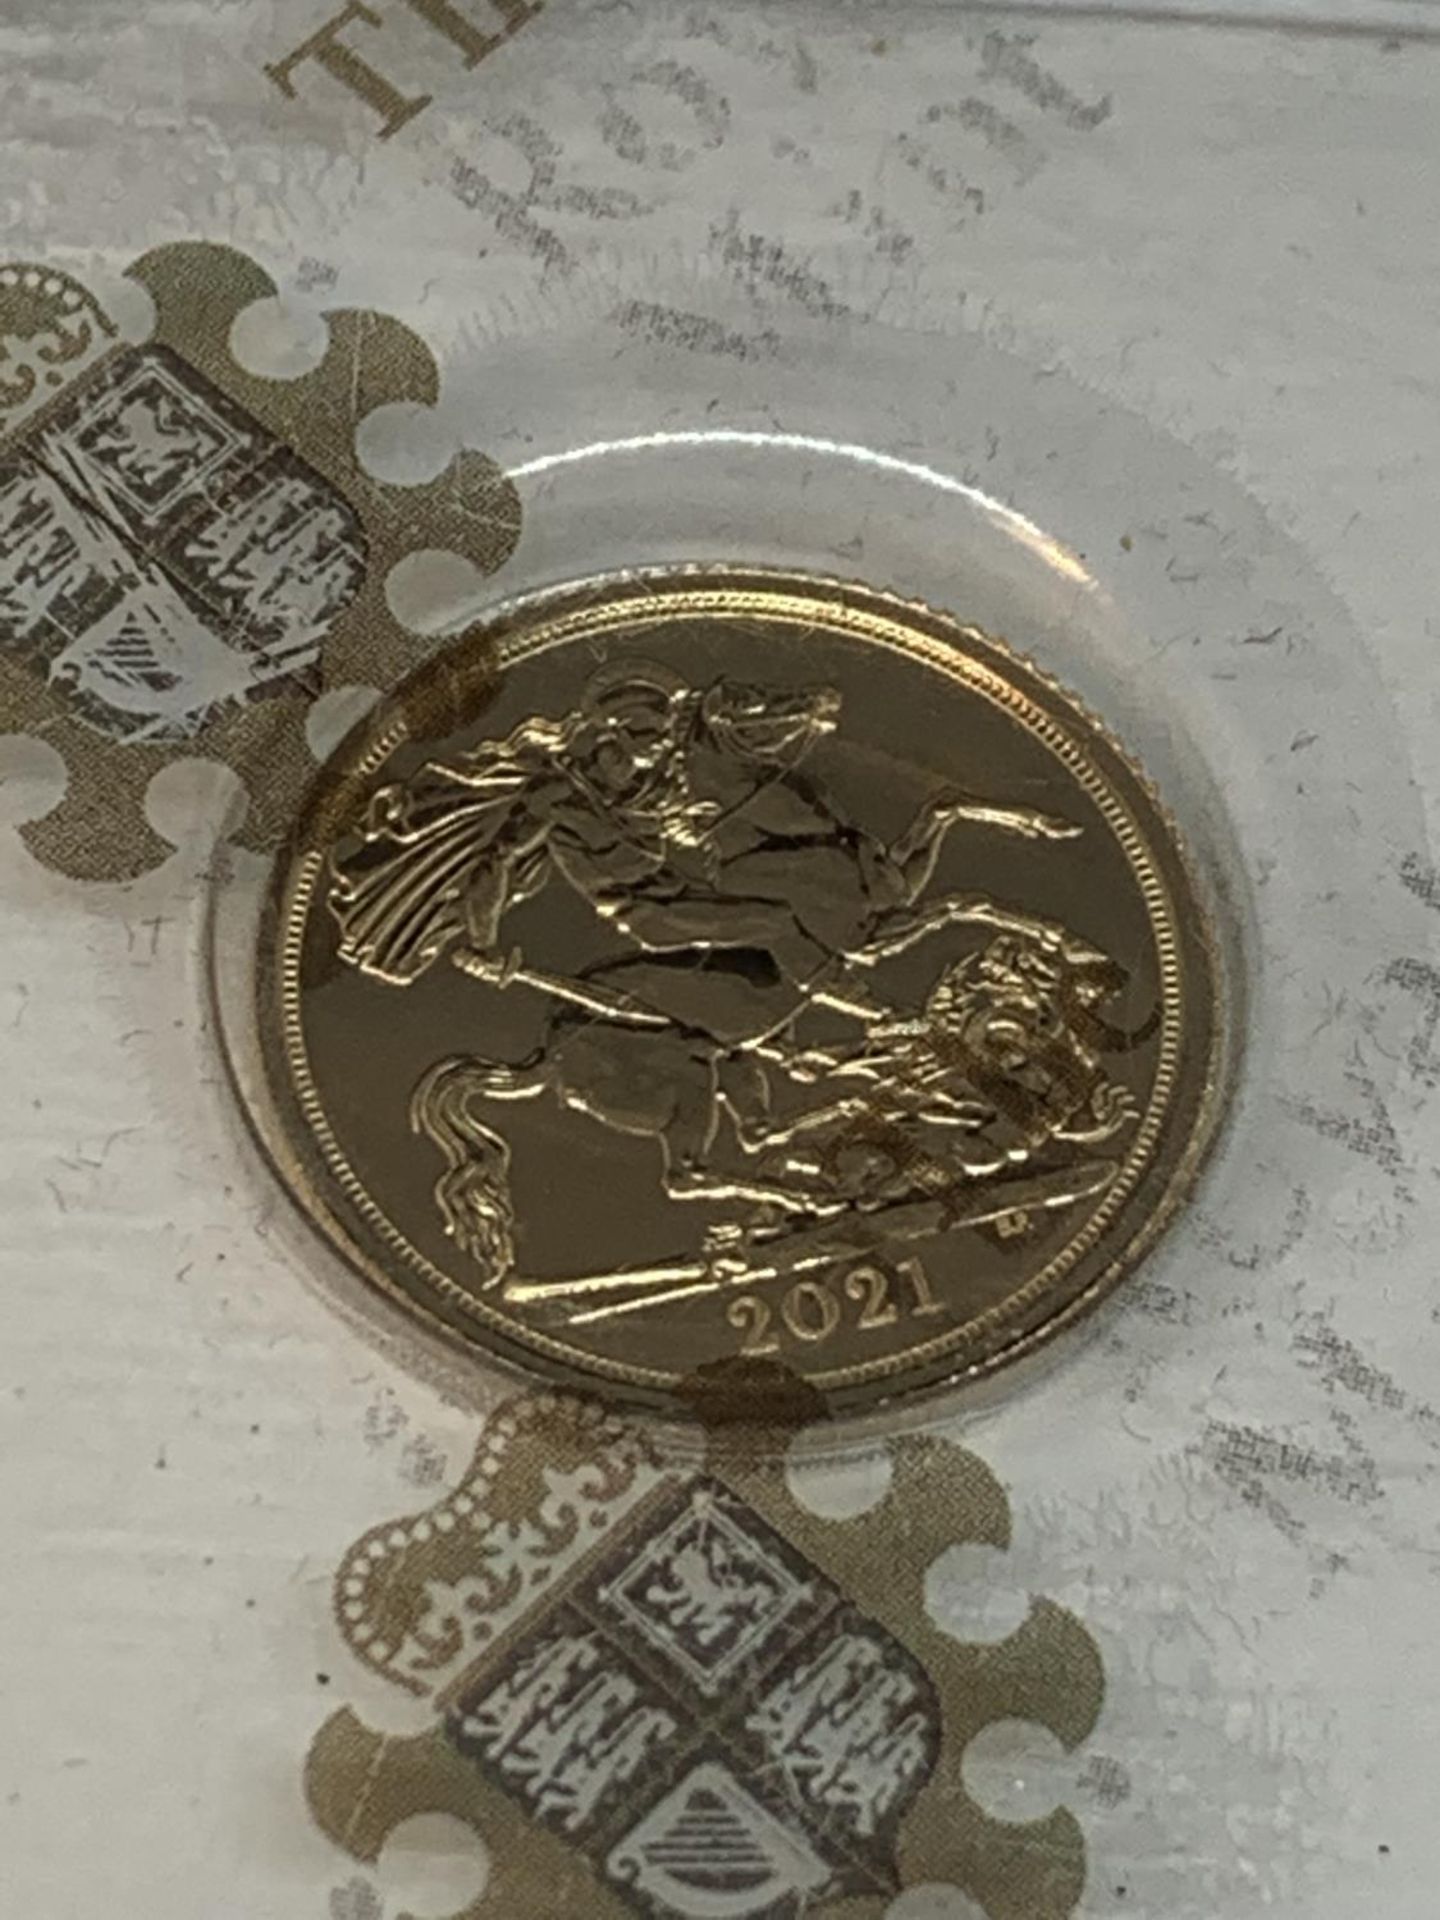 A 2021 GOLD HALF SOVERIEGN PROOF COIN